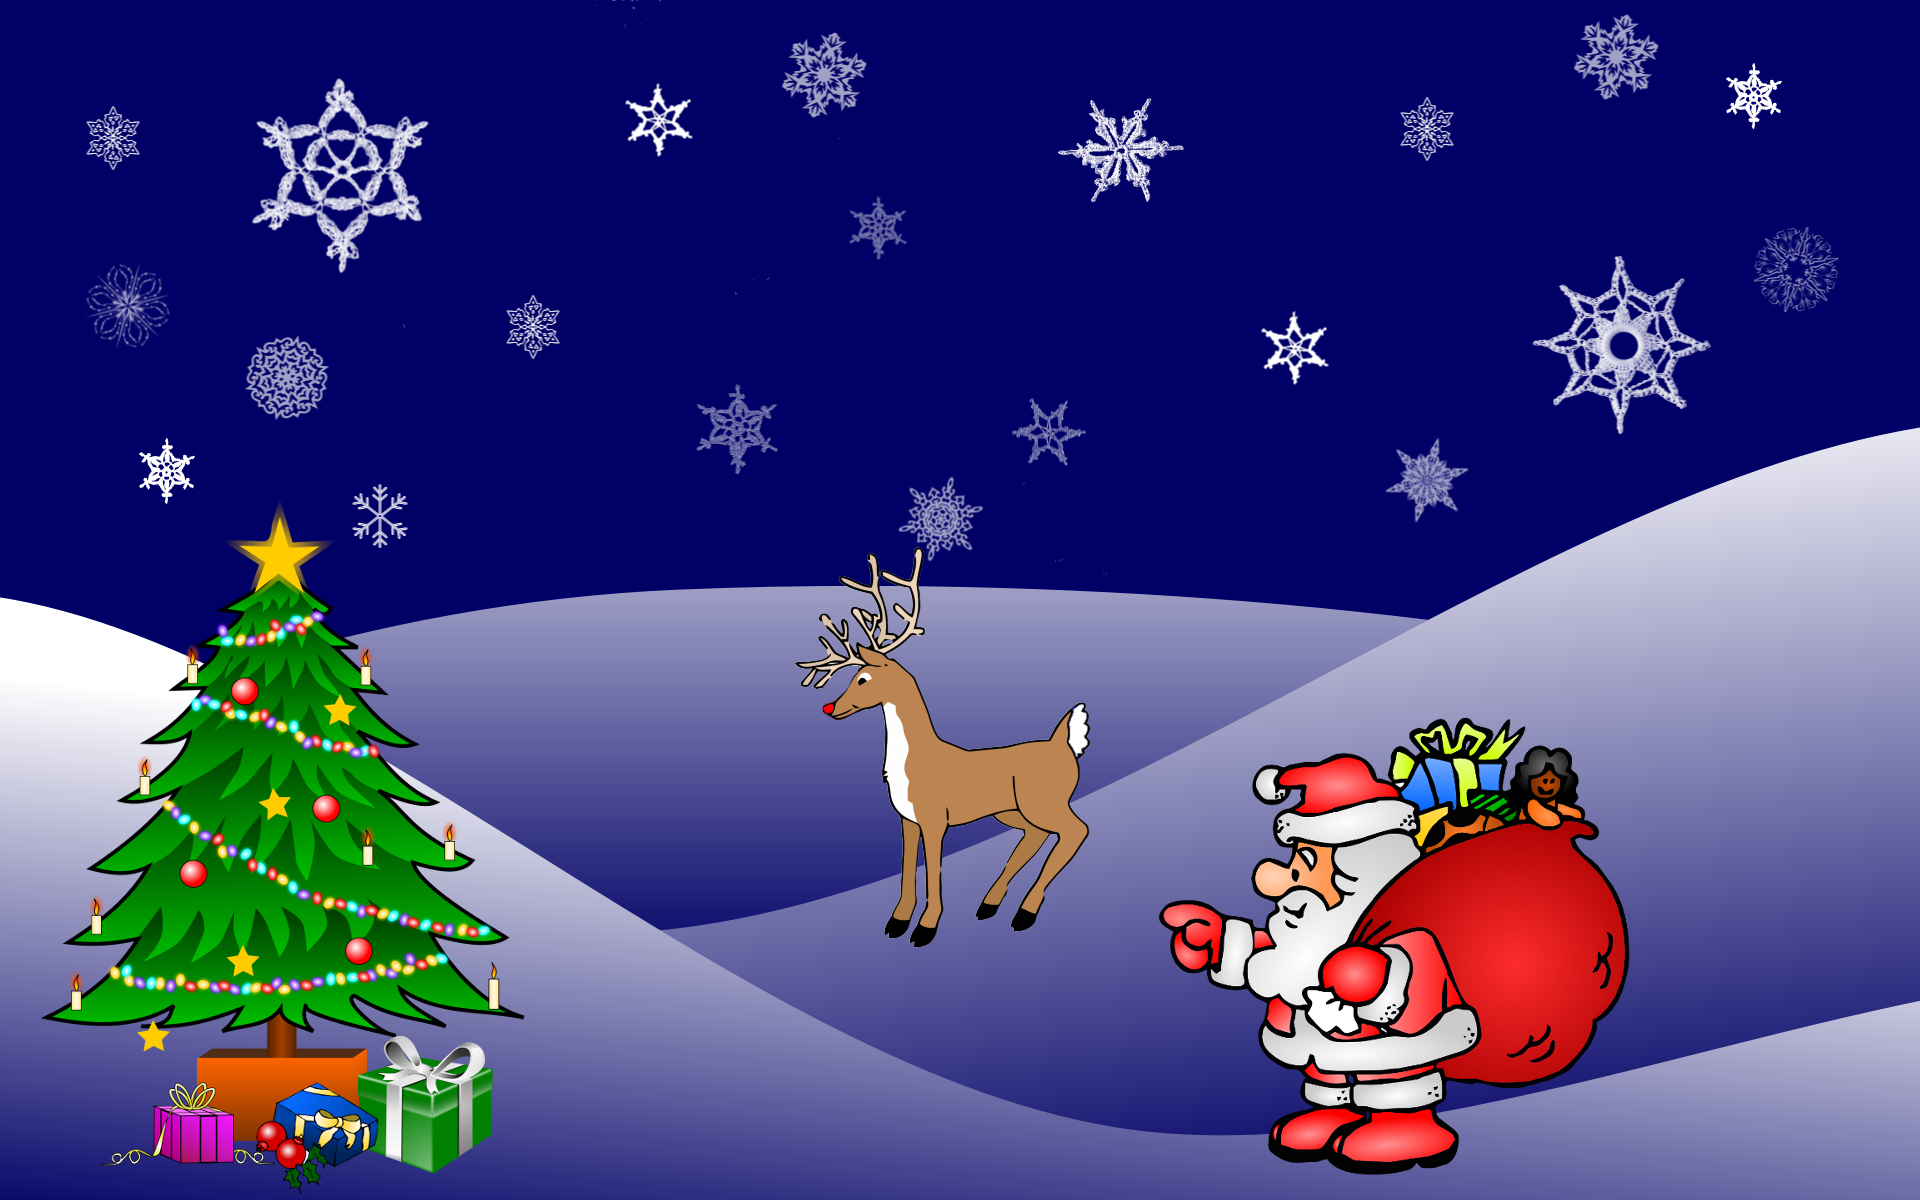 2015 free Christmas backgrounds - images, wallpapers, photos, pics ...